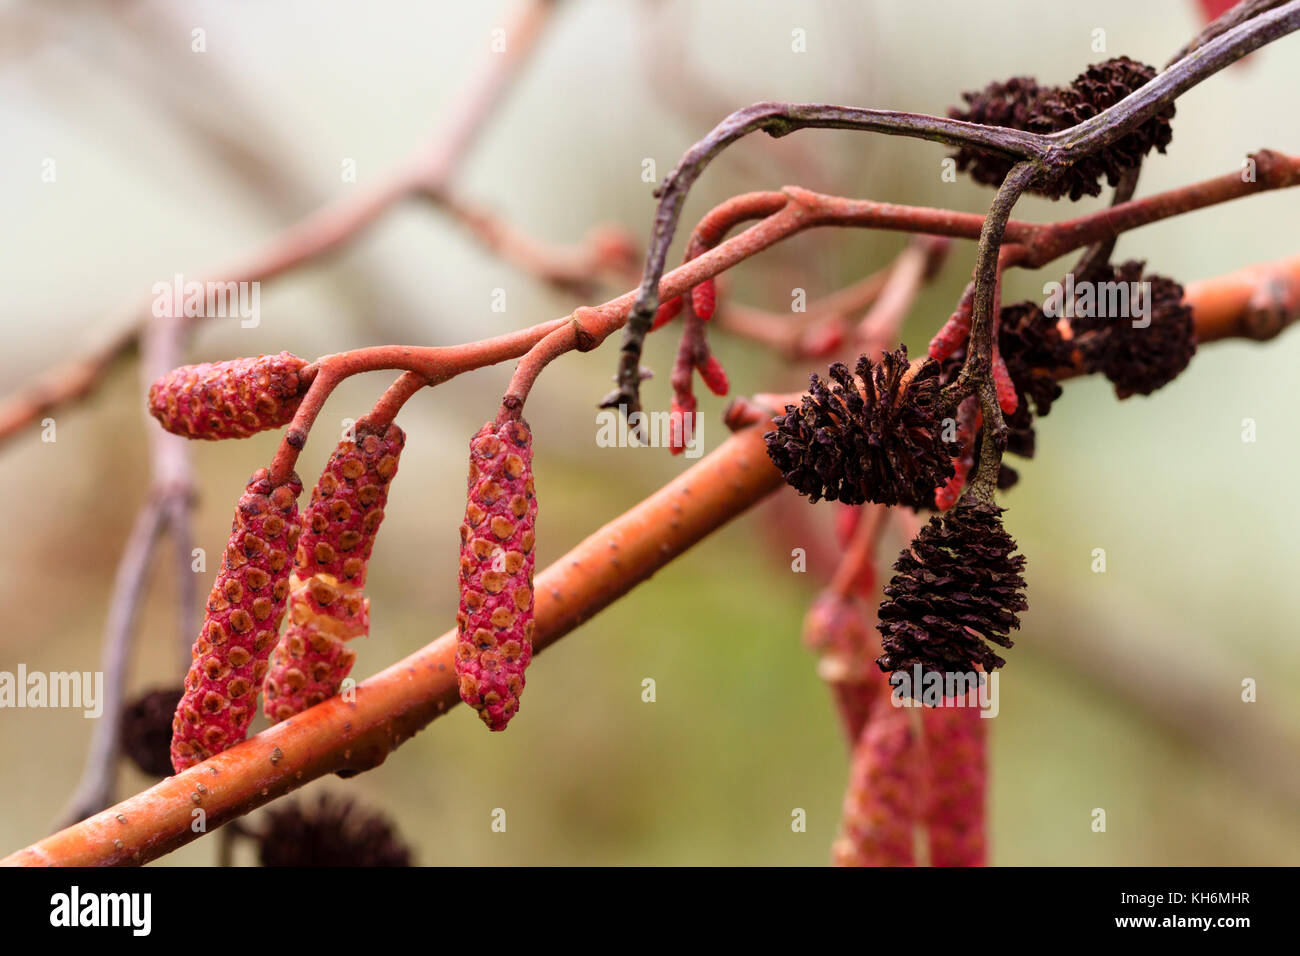 Young pink male catkins contrast with old female cones on the Autumn branches of the gold leaved alder, Alnus incana 'Aurea' Stock Photo